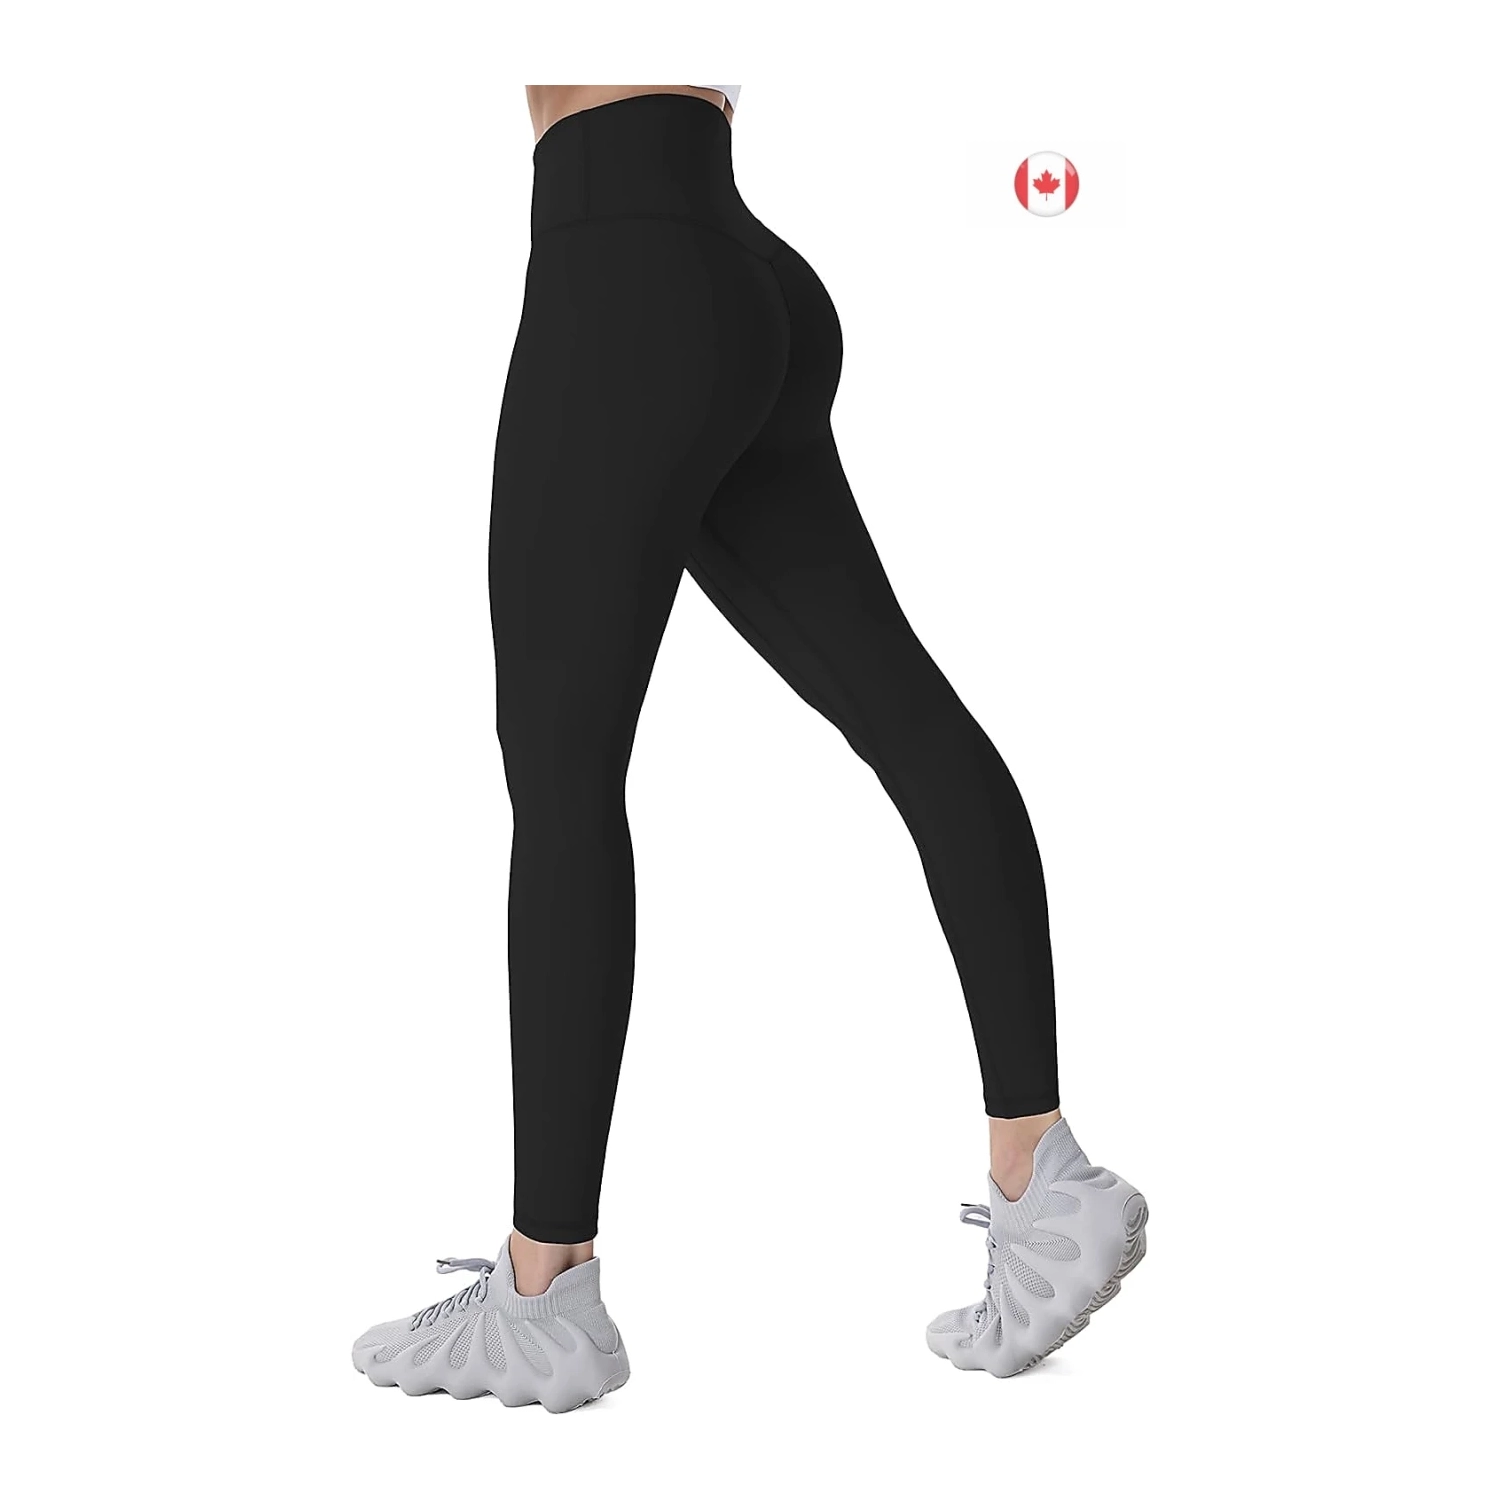 Workout Leggings for Women, Squat Proof High Waisted Yoga Pants 4 Way  Stretch, Buttery Soft - Medium Black